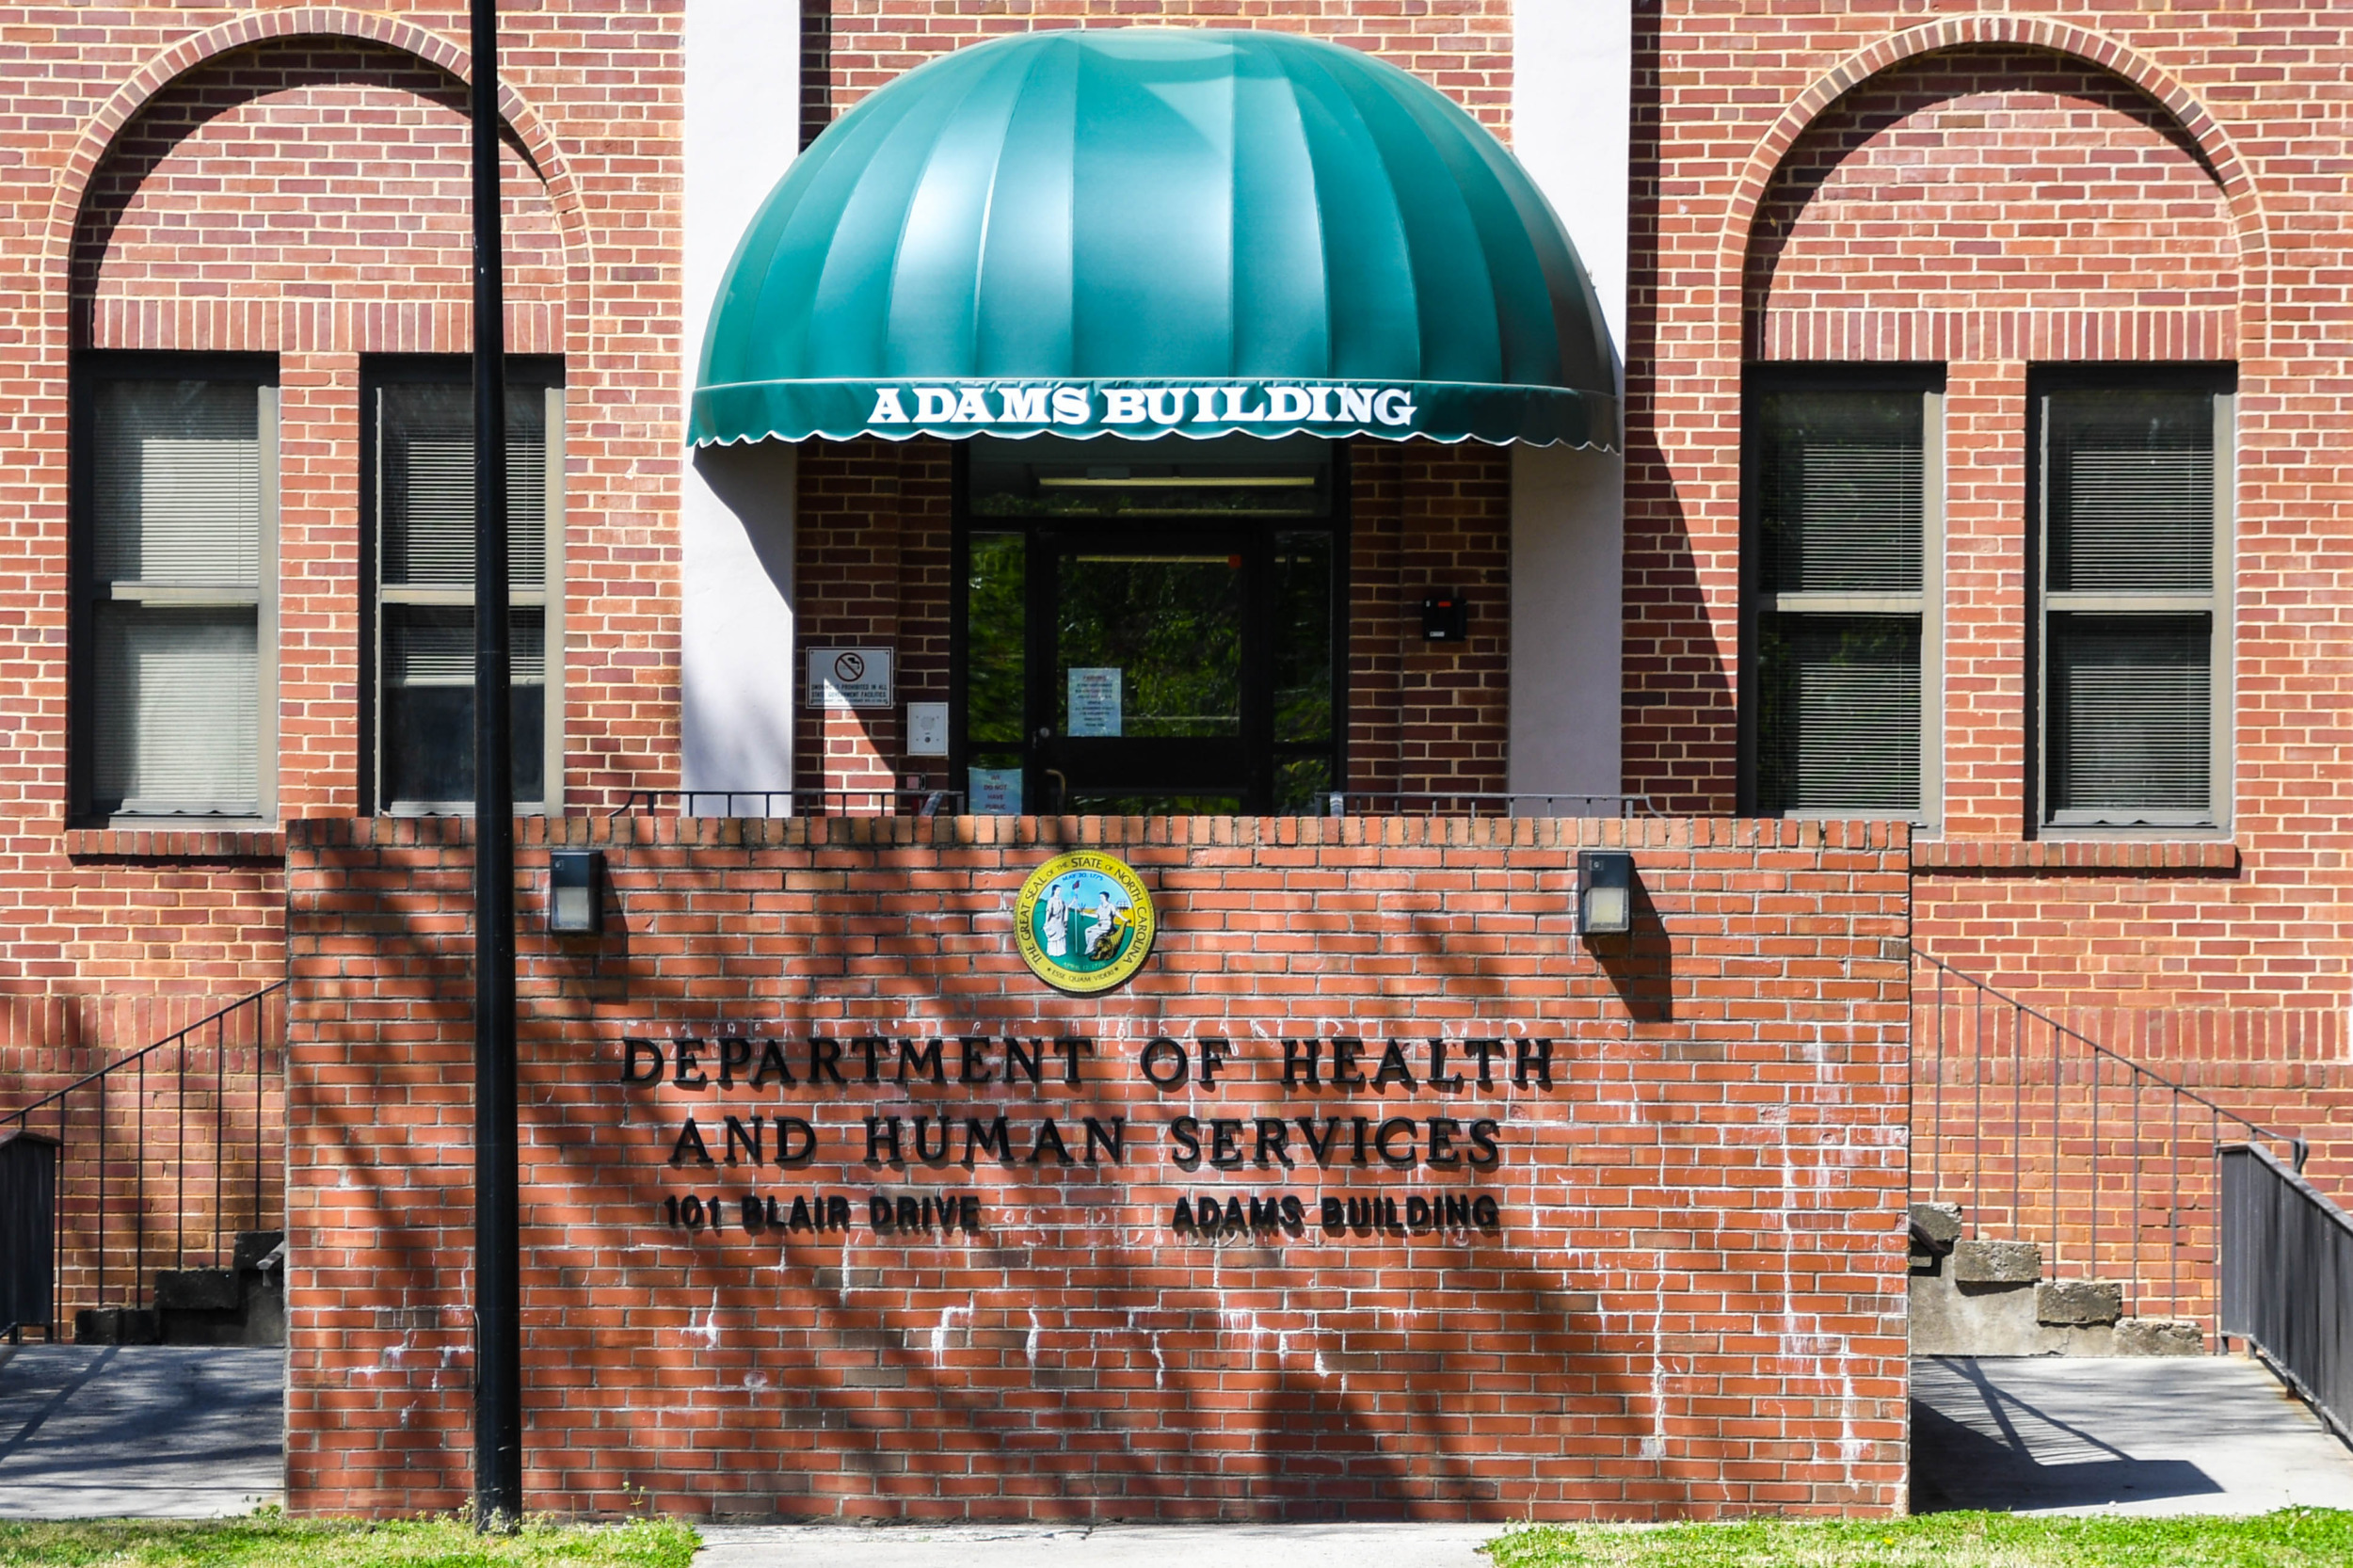 Foster care lawsuit: Red brick building with green entry stoop canopy and black letter signage "Department of Health and Human Services"